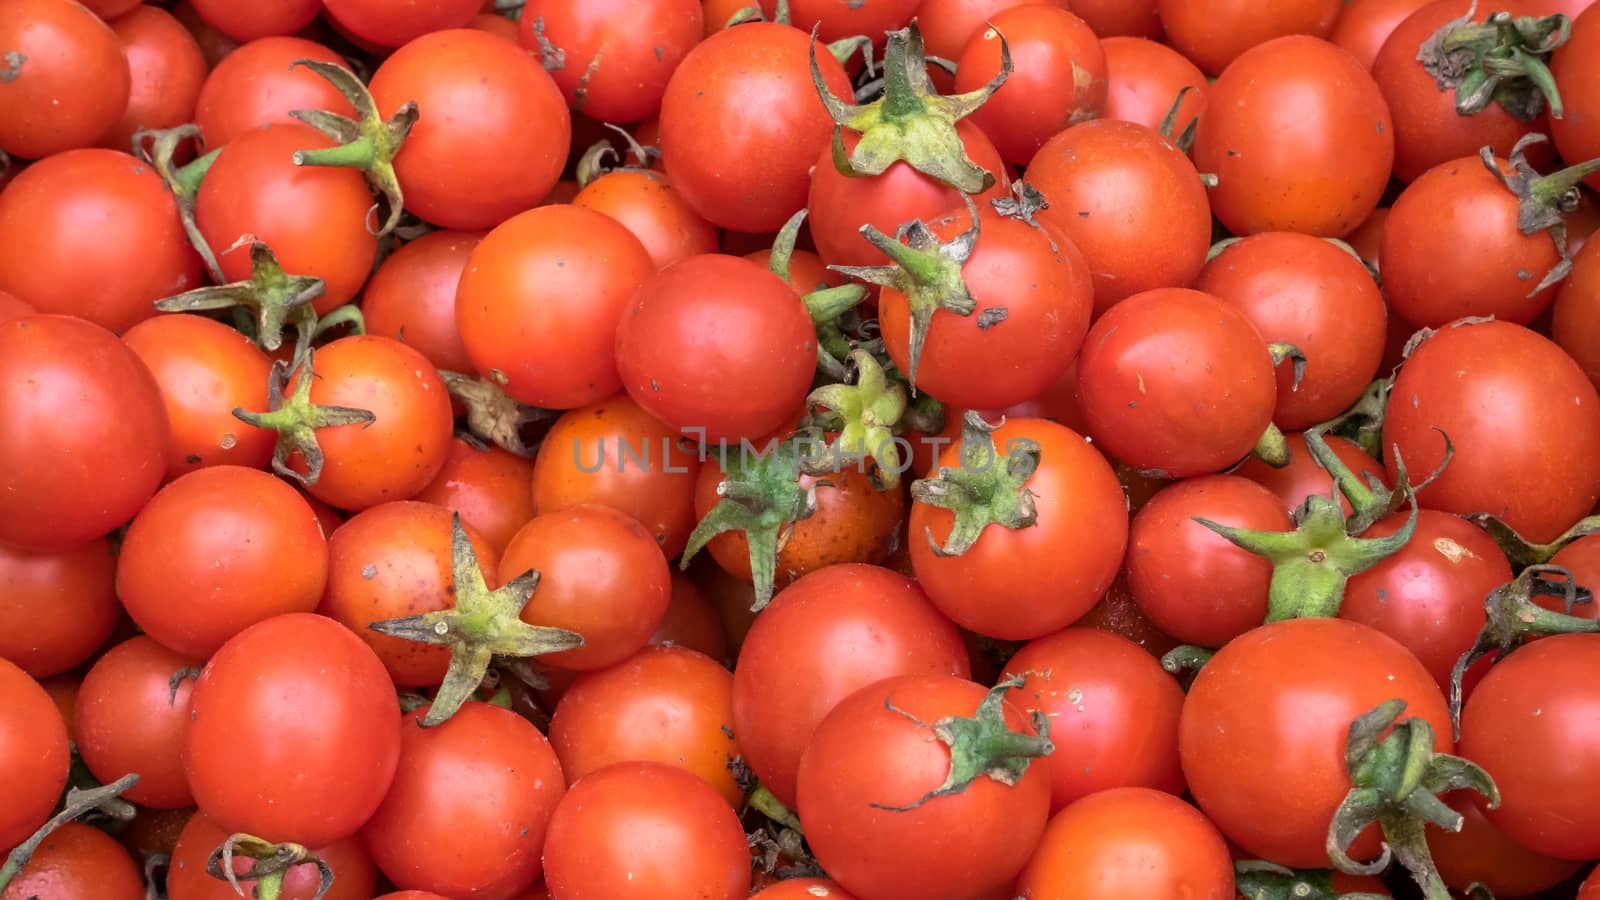 The close up of fresh tomatoes vegetable at street food market in Taipei, Taiwan.